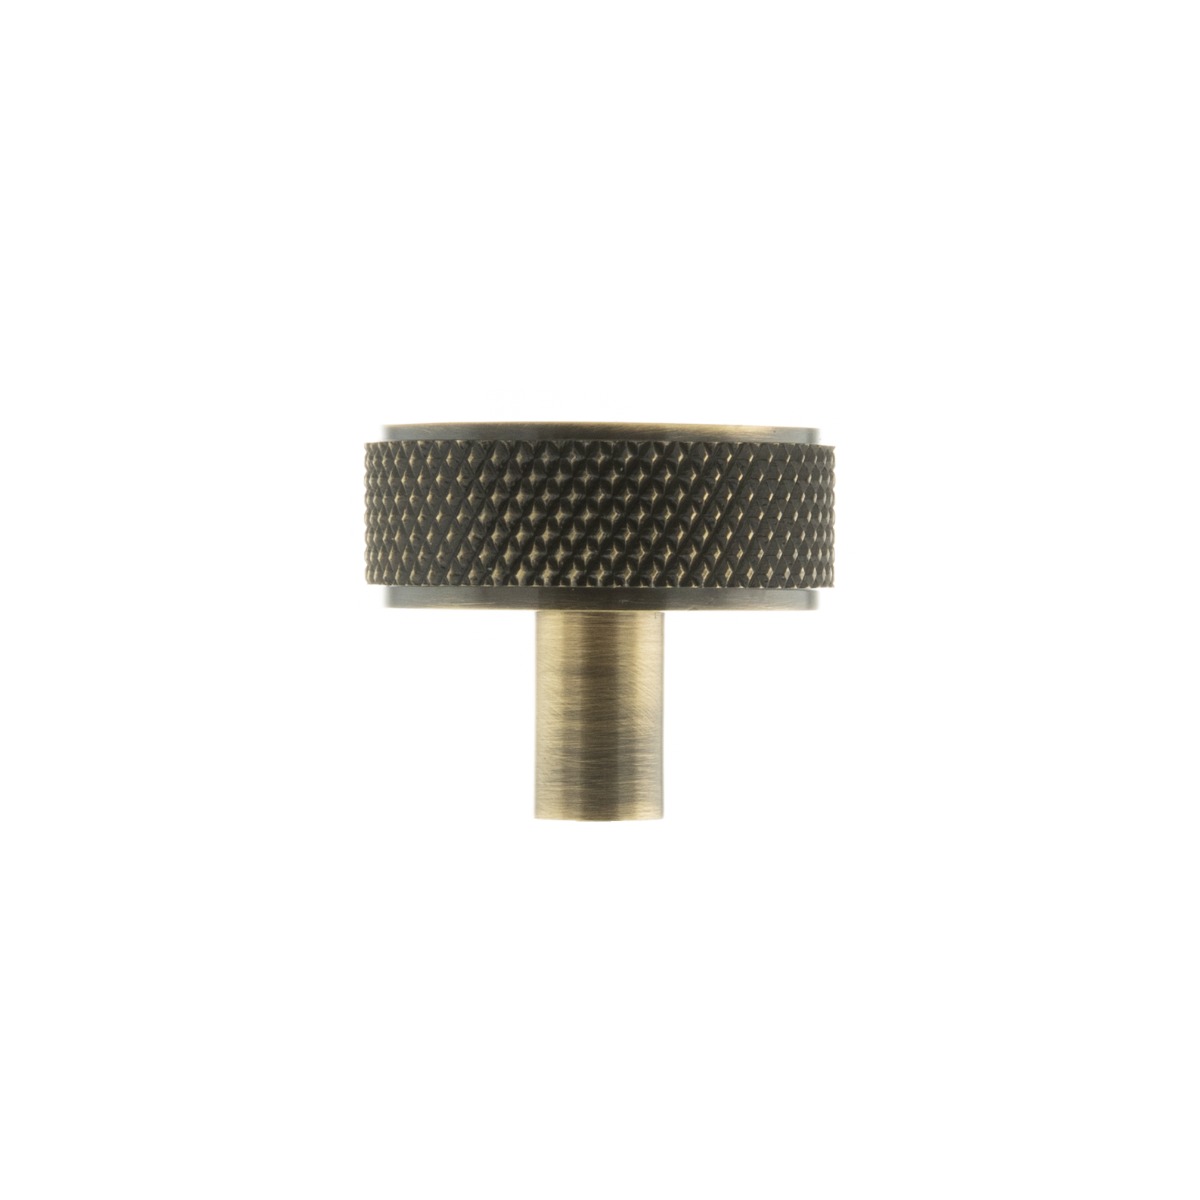 Millhouse Brass Hargreaves Disc Knurled Cabinet Knob on Concealed Fix - Antique Brass MHCK1935AB